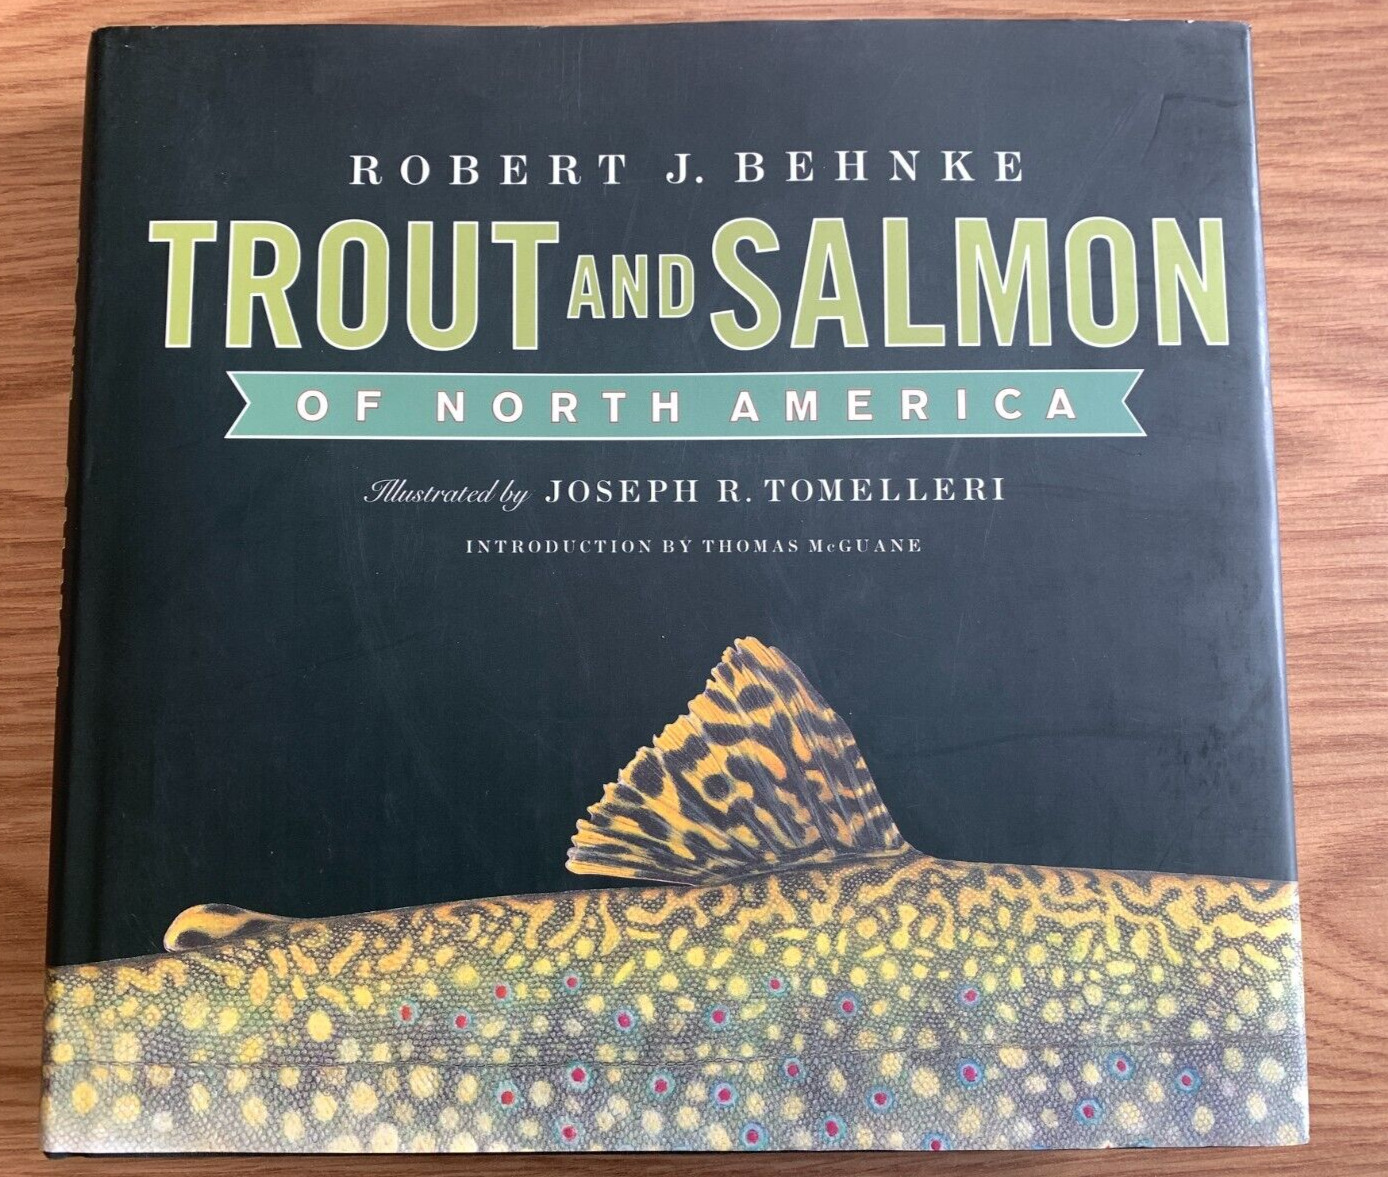 Trout and Salmon of North America Robert J Behnke Hardcover EXCELLENT CONDITION